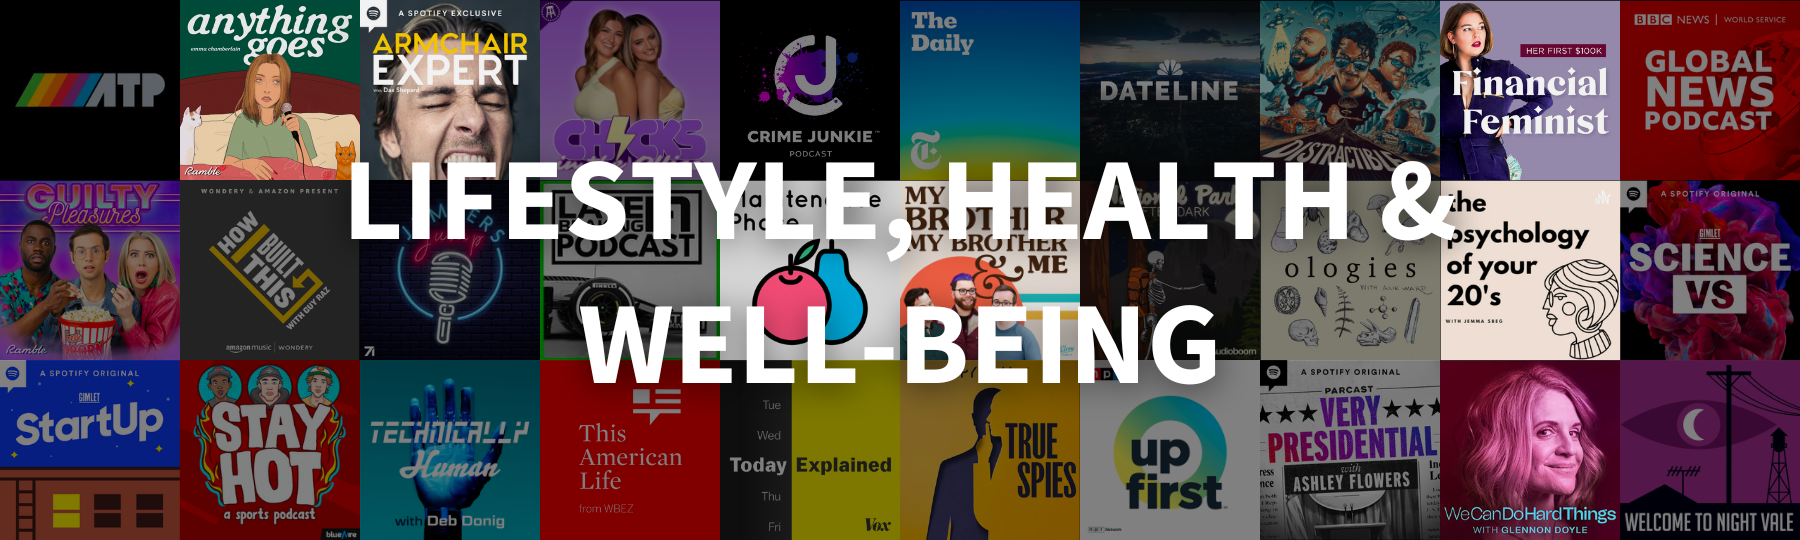 A graphic that says "Lifestyle, Health and Well-Being" with a collage of podcast covers in the back.